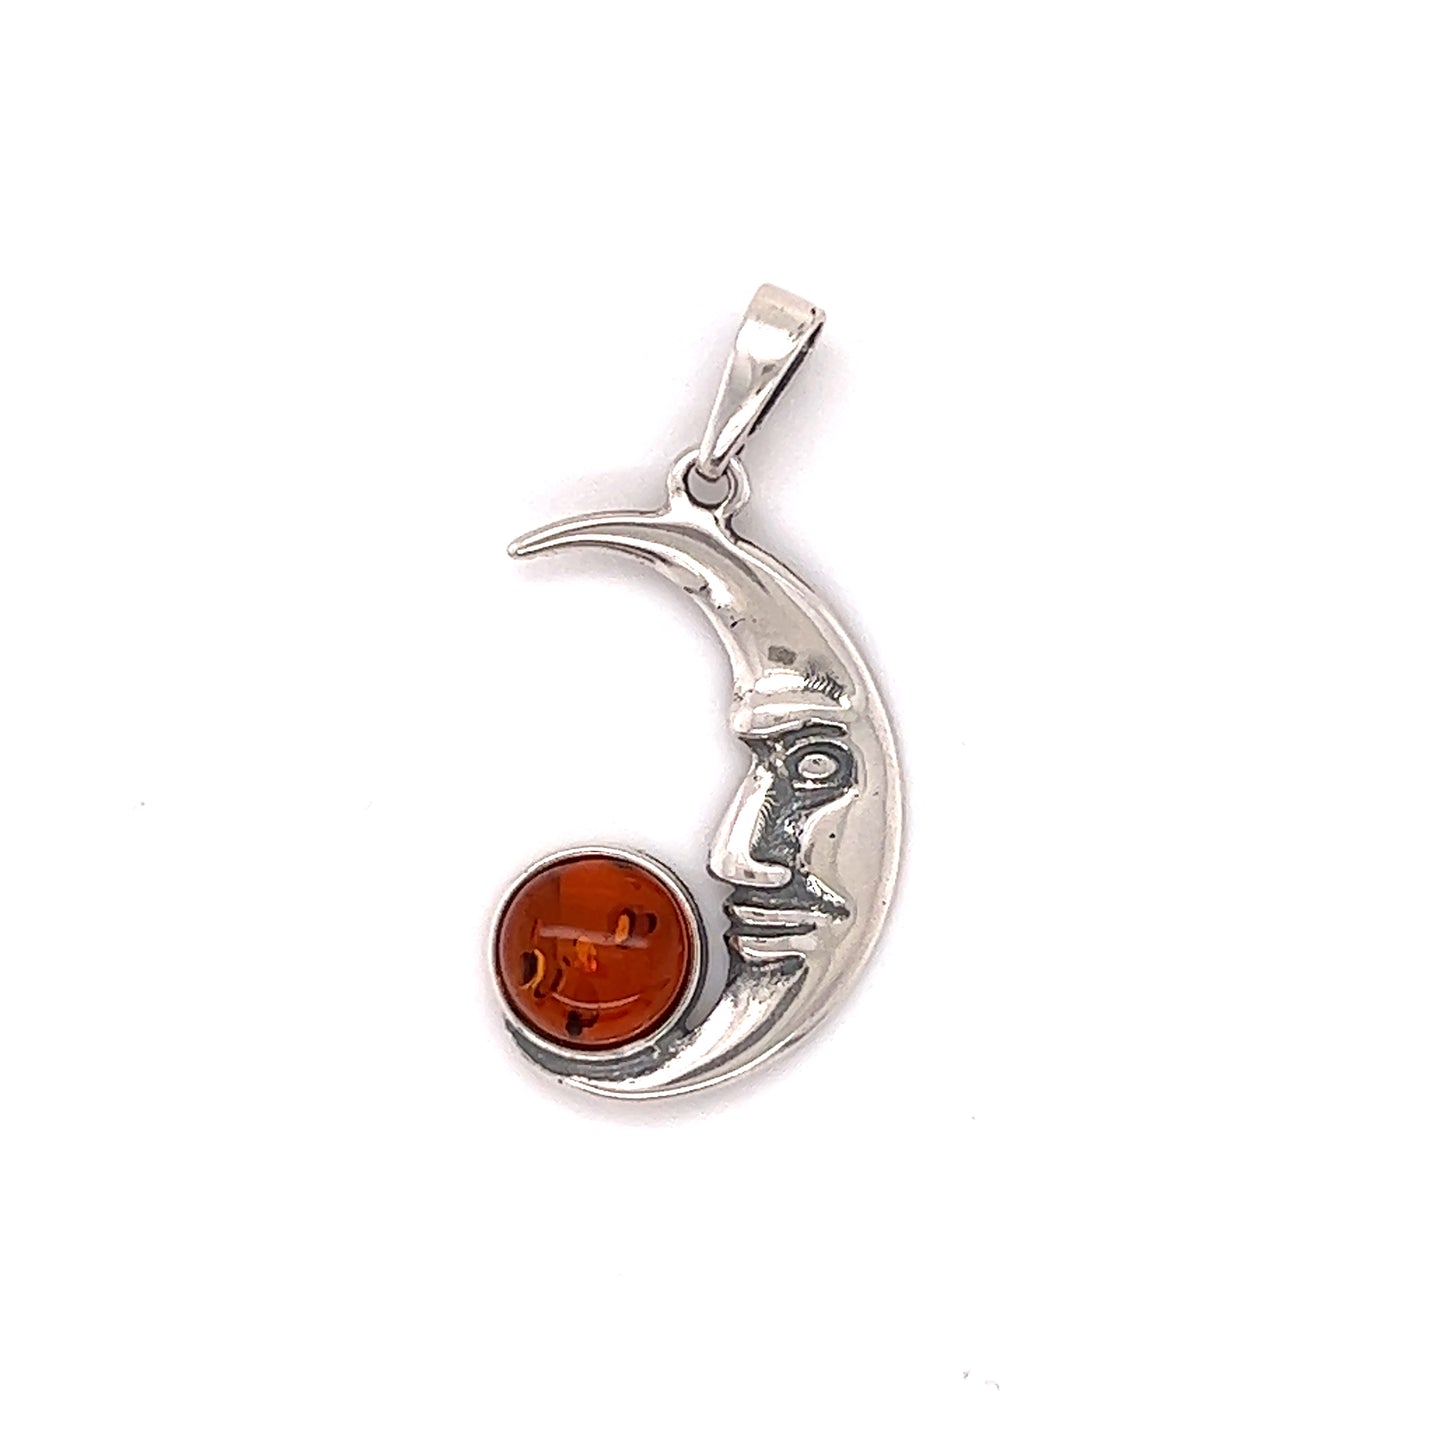 This Super Silver pendant features a captivating crescent moon design adorned with an exquisite Baltic Amber Man in the Moon stone.